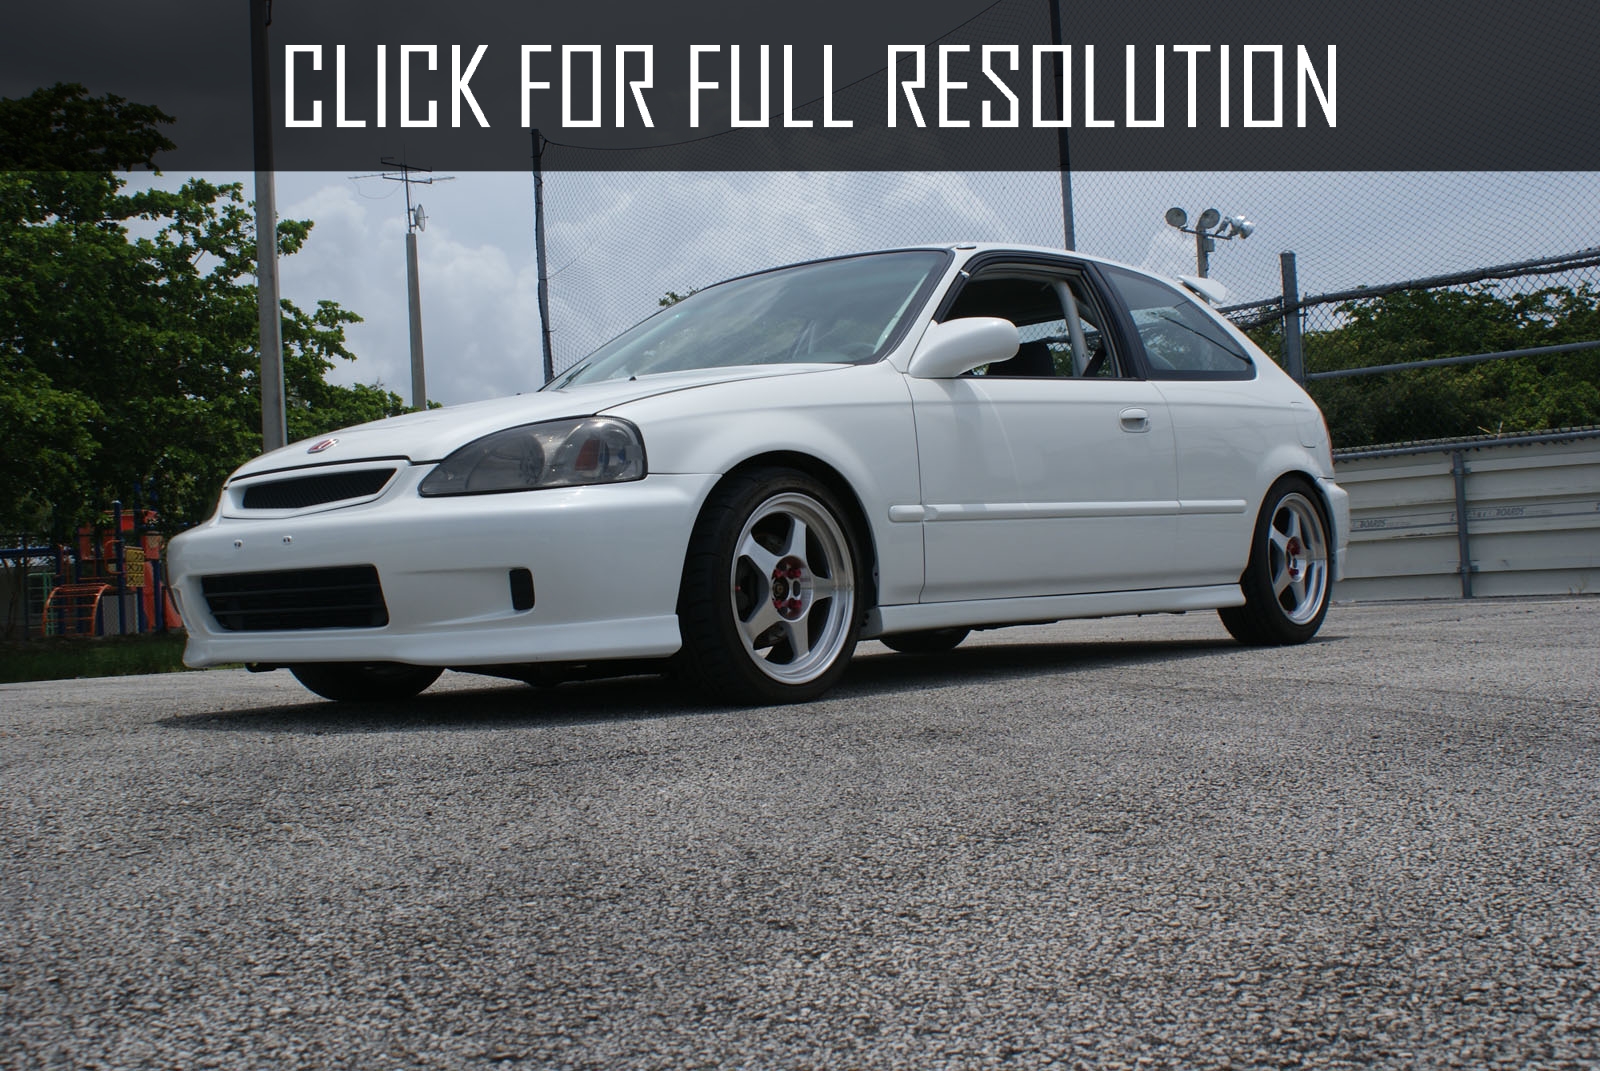 1997 Honda Civic Si Best Image Gallery 4 17 Share And Download